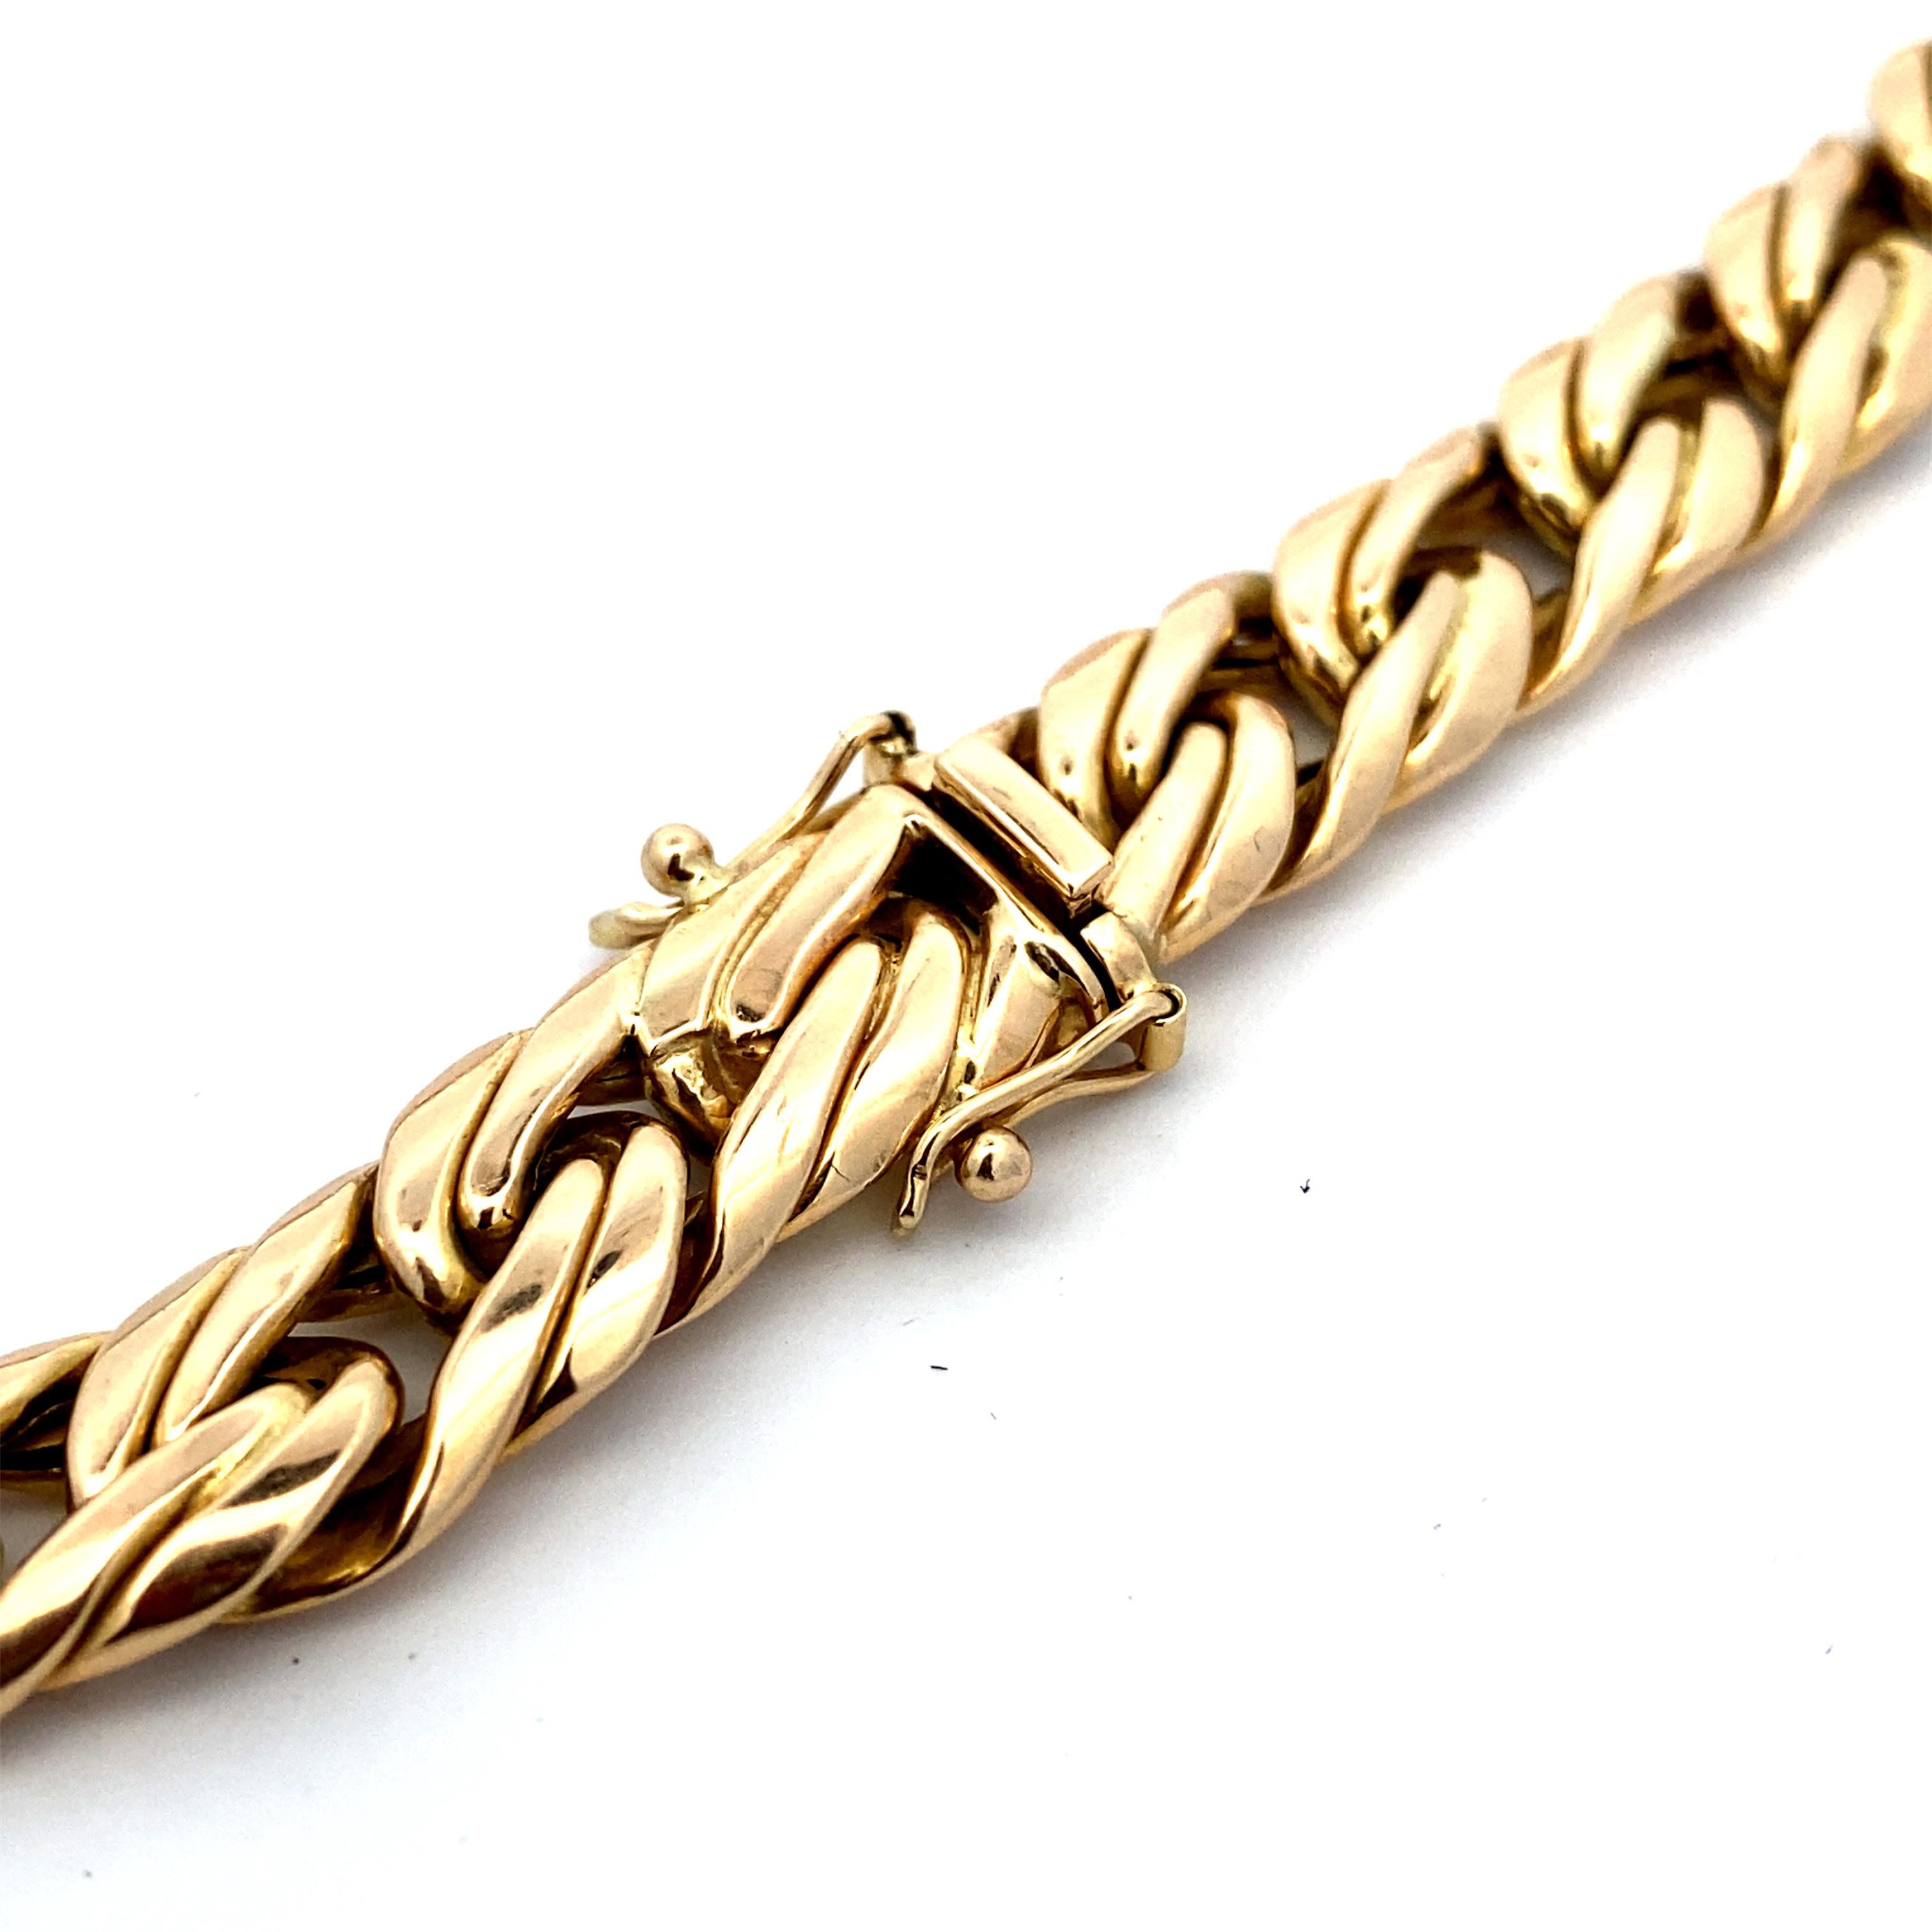 Established in the early 1960's Zelman and Friedman (NYC) have been producing extremely well-made gold jewelry including chains like this. Stamped 14k Z & F. The links are graduated in size from 9mm to 15.5mm at the center. A hollow construction